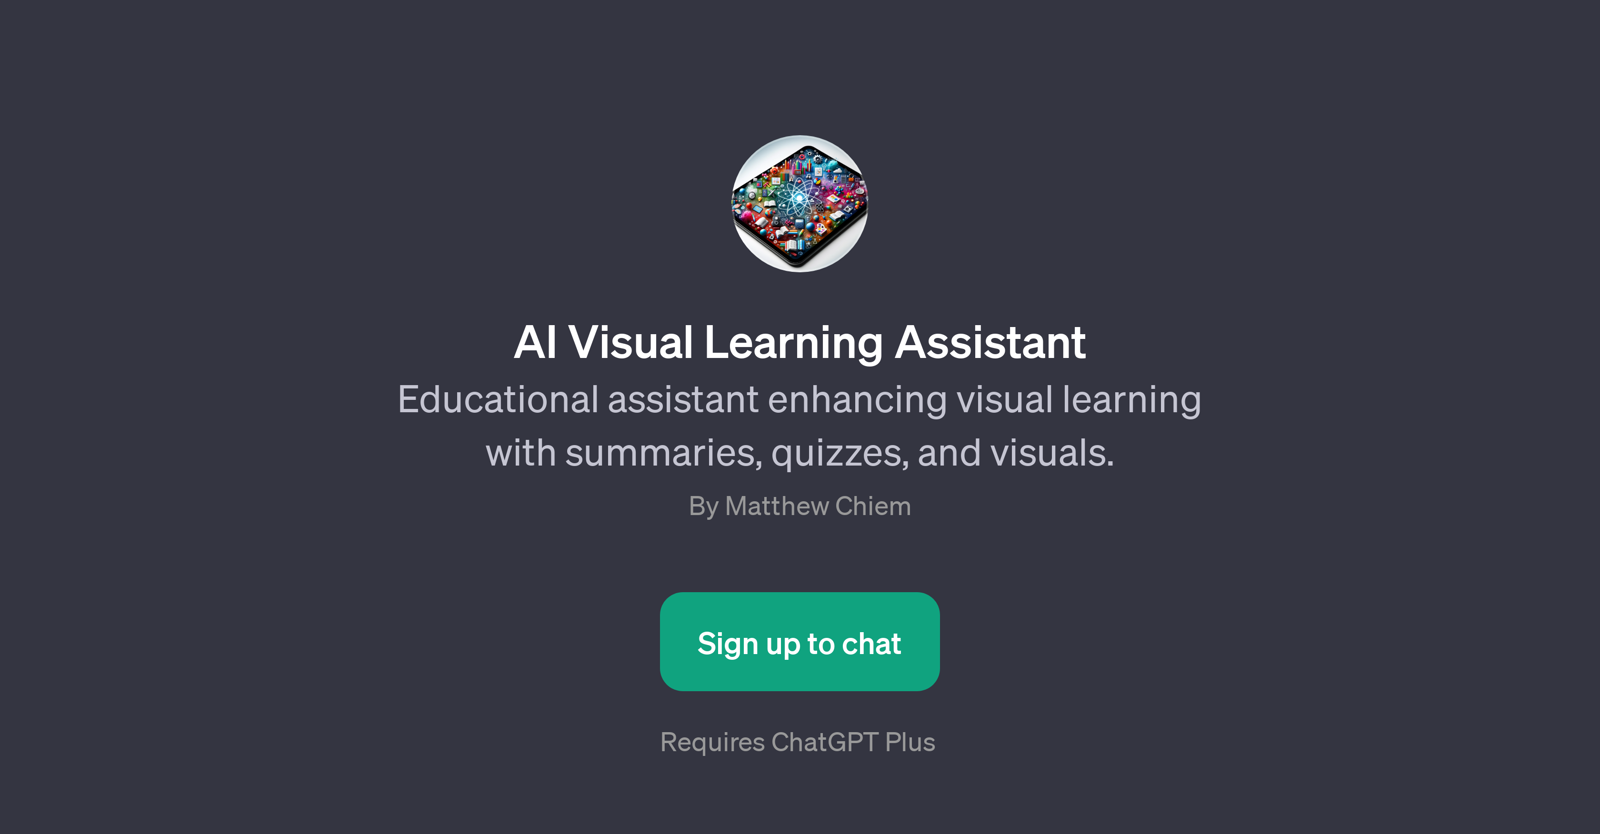 AI Visual Learning Assistant website